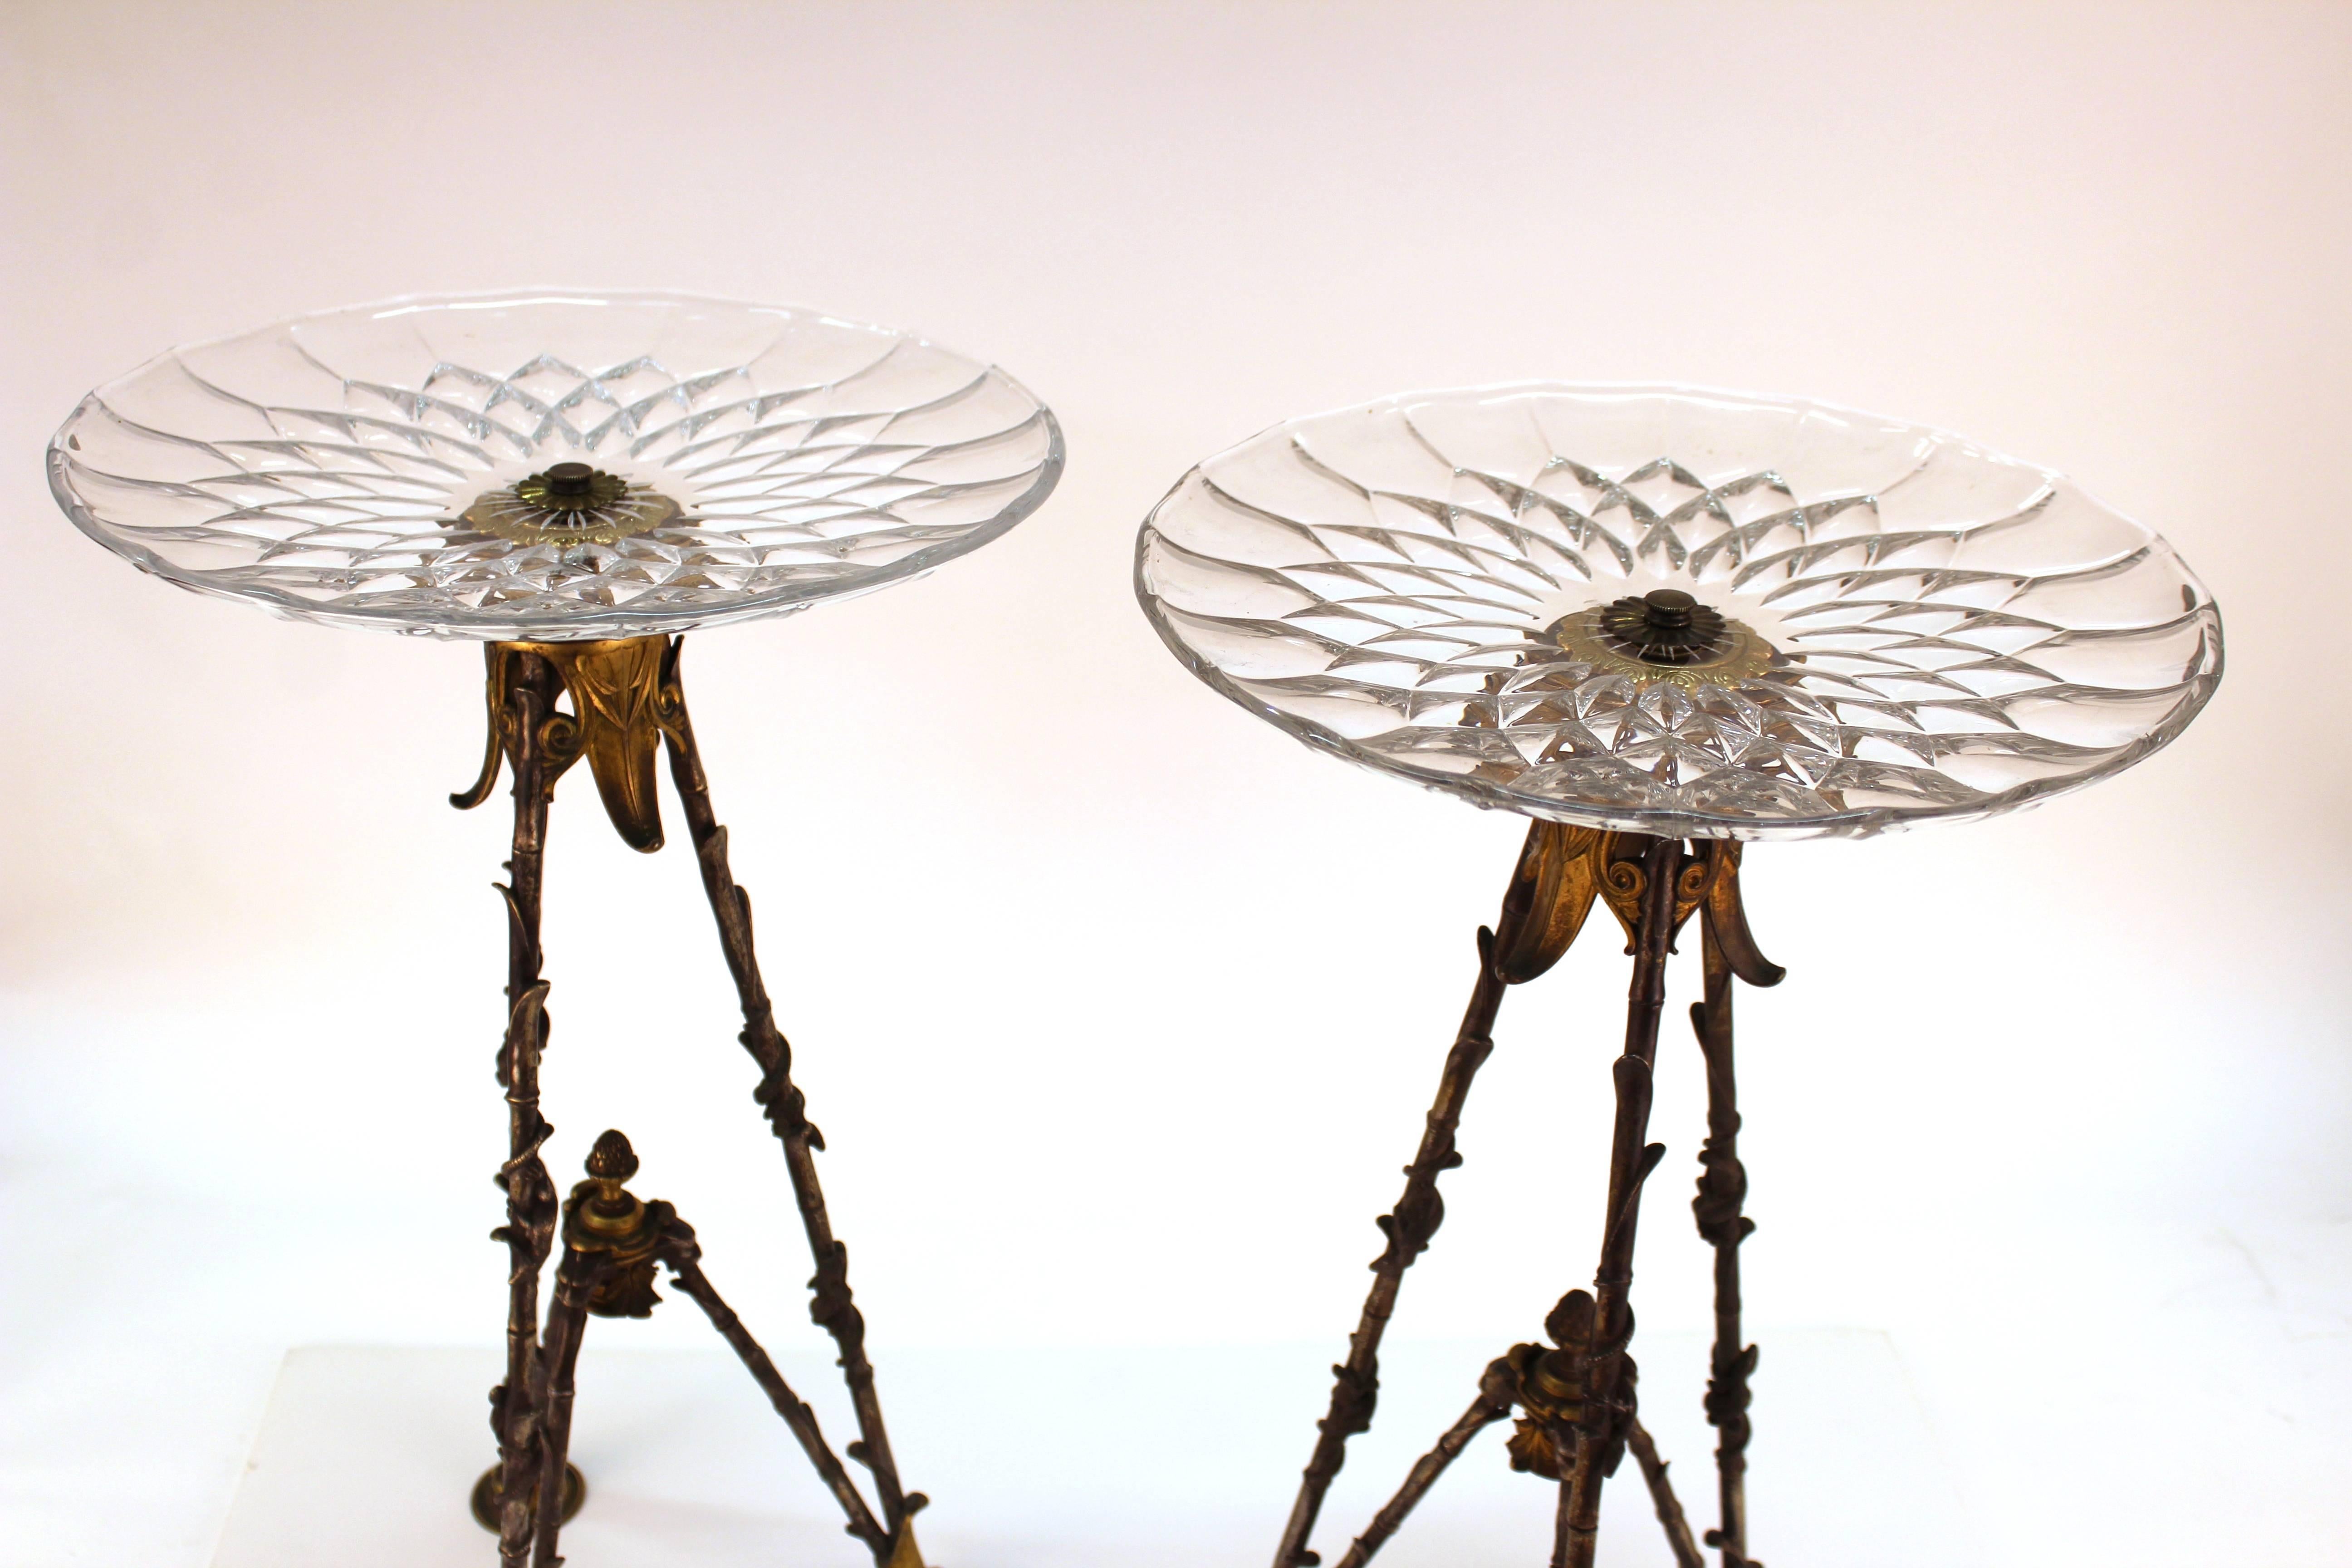 A pair of highly decorative French Victorian tall pastry holders with circular Val St. Lambert glass plates atop elaborate tripod bronze bases with sculptural naturalist details and salamanders. The pair dates back to the 1880s and was made in